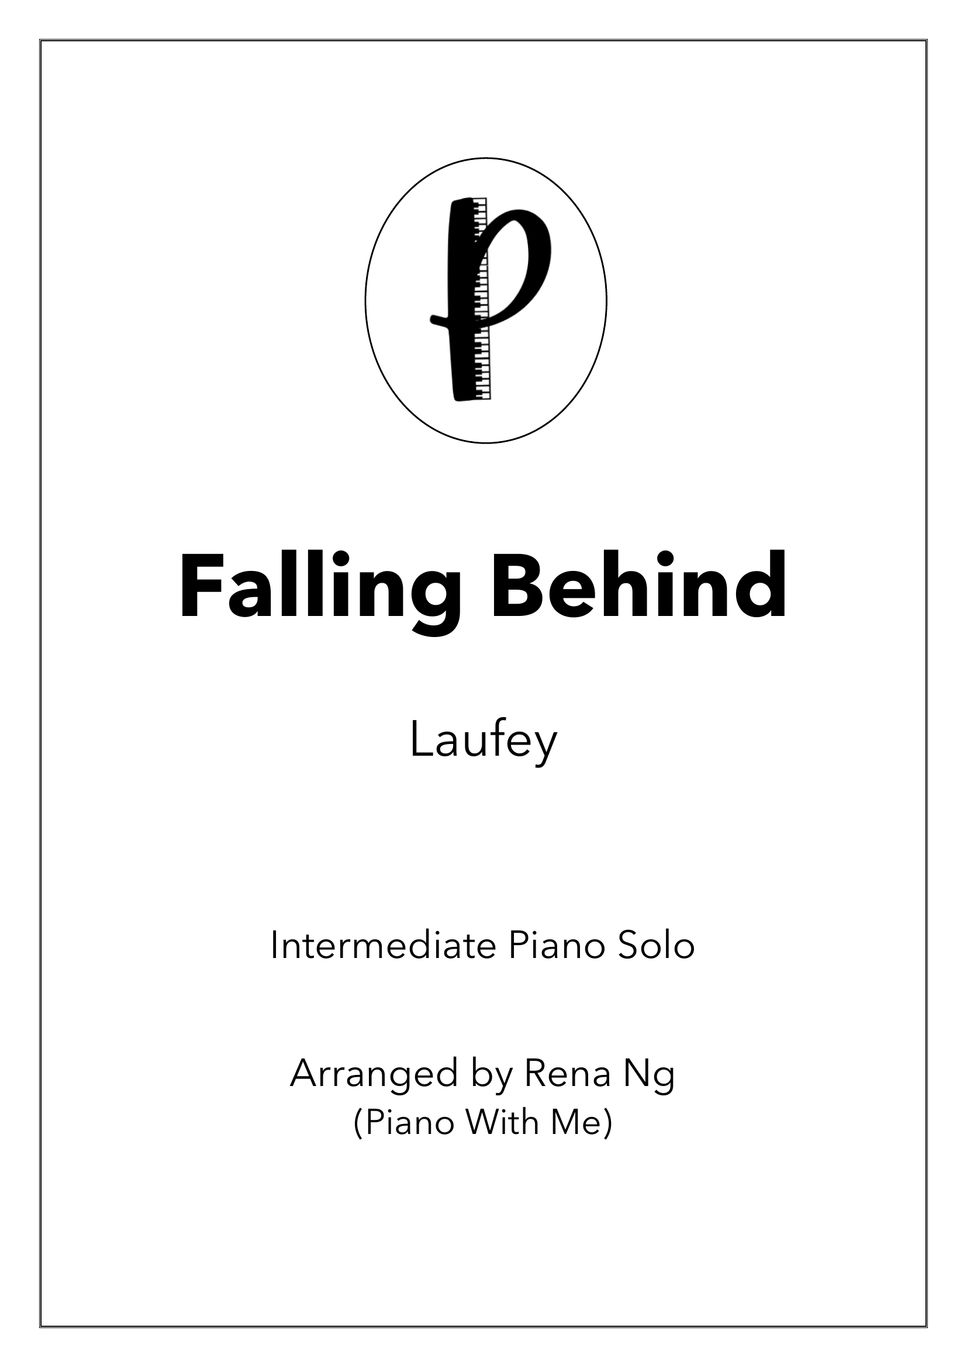 Laufey - Falling Behind (Piano Solo) by Piano With Me